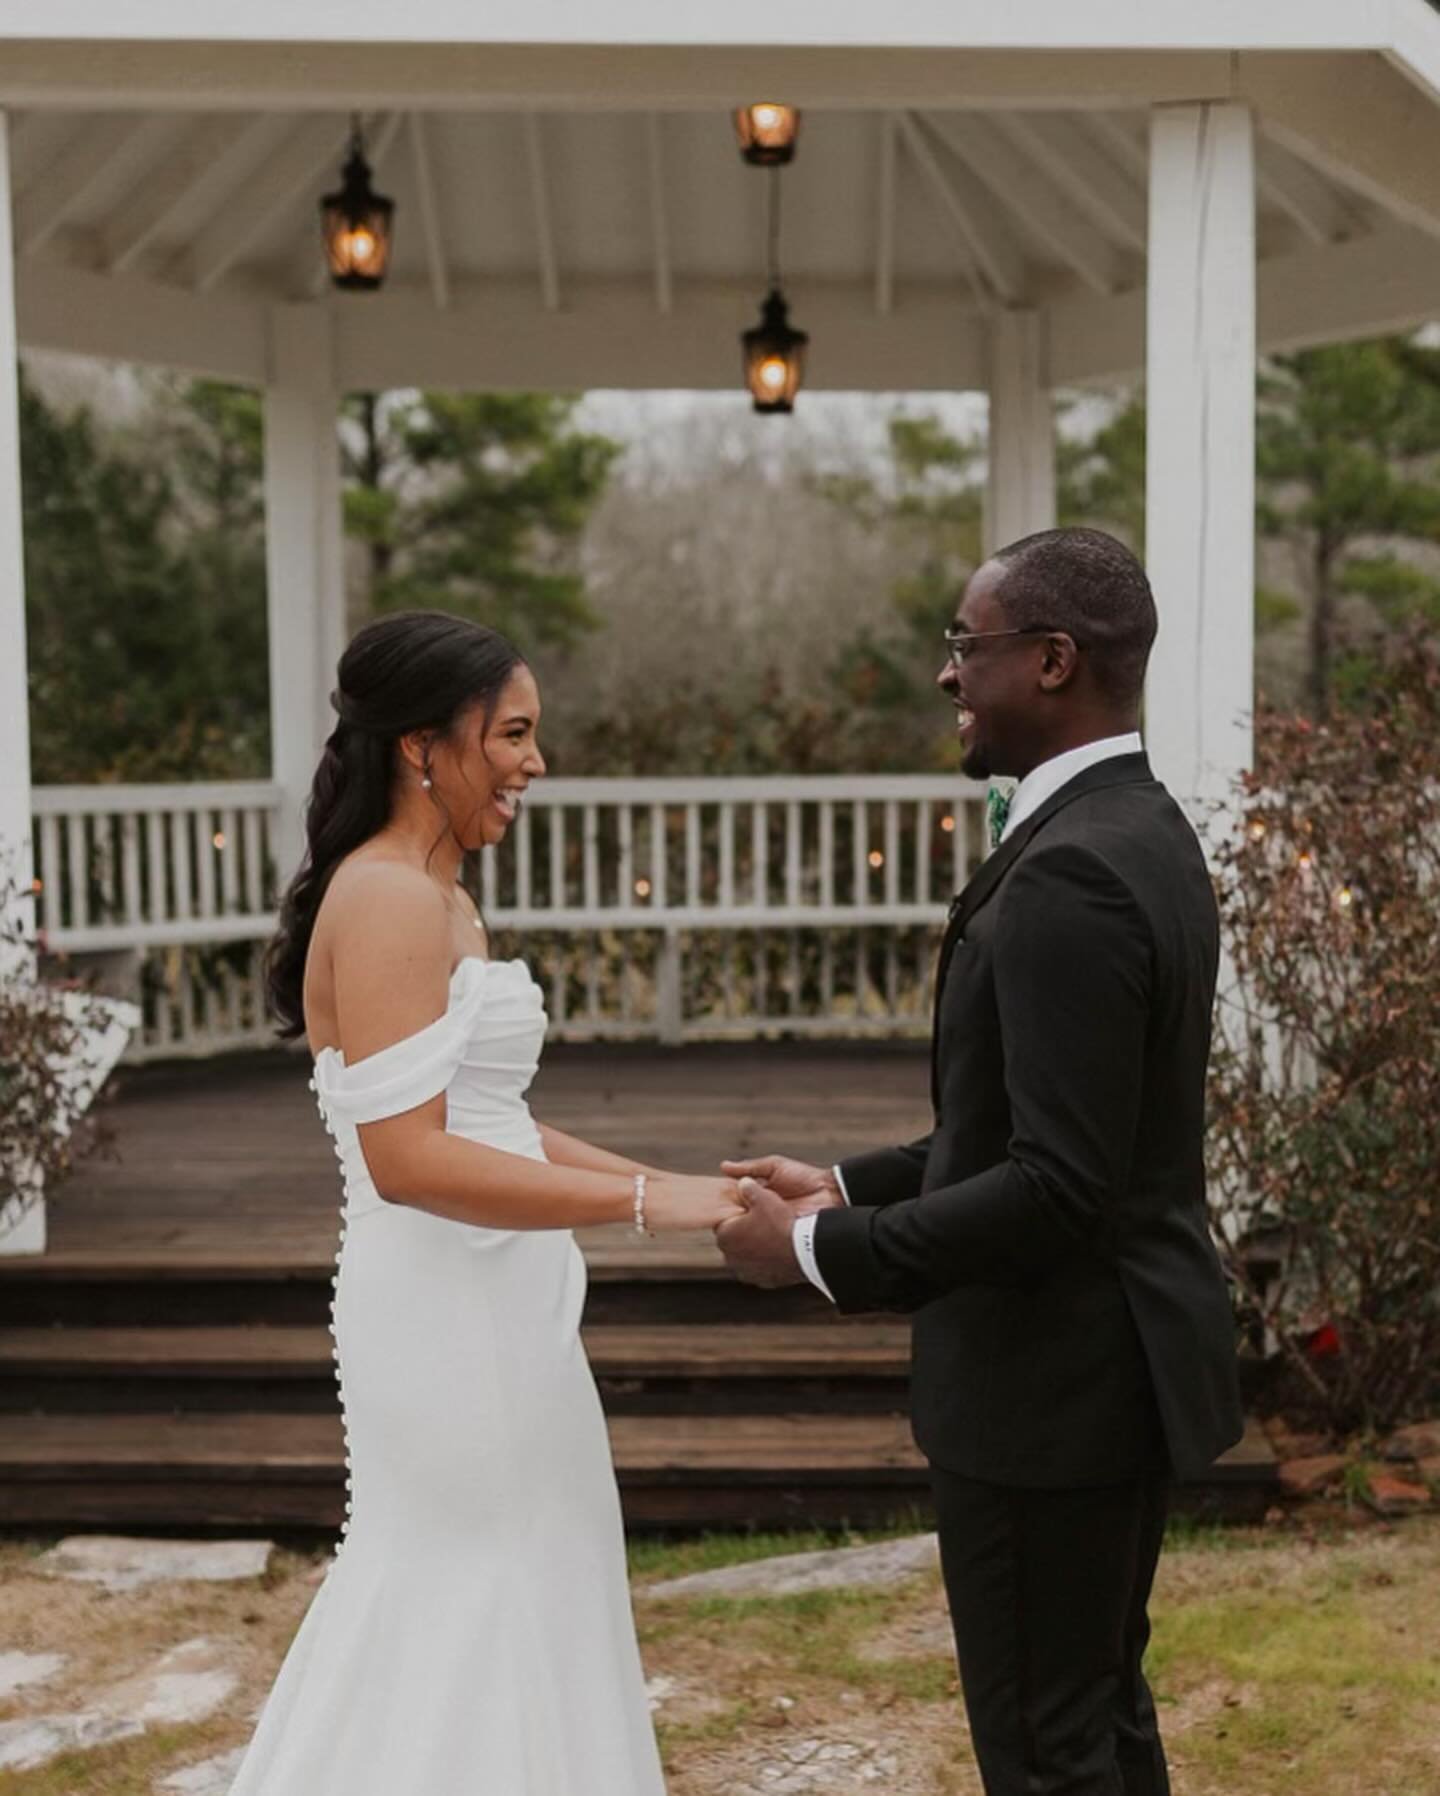 Breyanna &amp; Frank&rsquo;s first look had us like 🥹 

Having a first look depends on the couple&rsquo;s preference, but if they&rsquo;re open to it, it can be incredibly special and sacred. It&rsquo;s also practical for the timeline, especially du